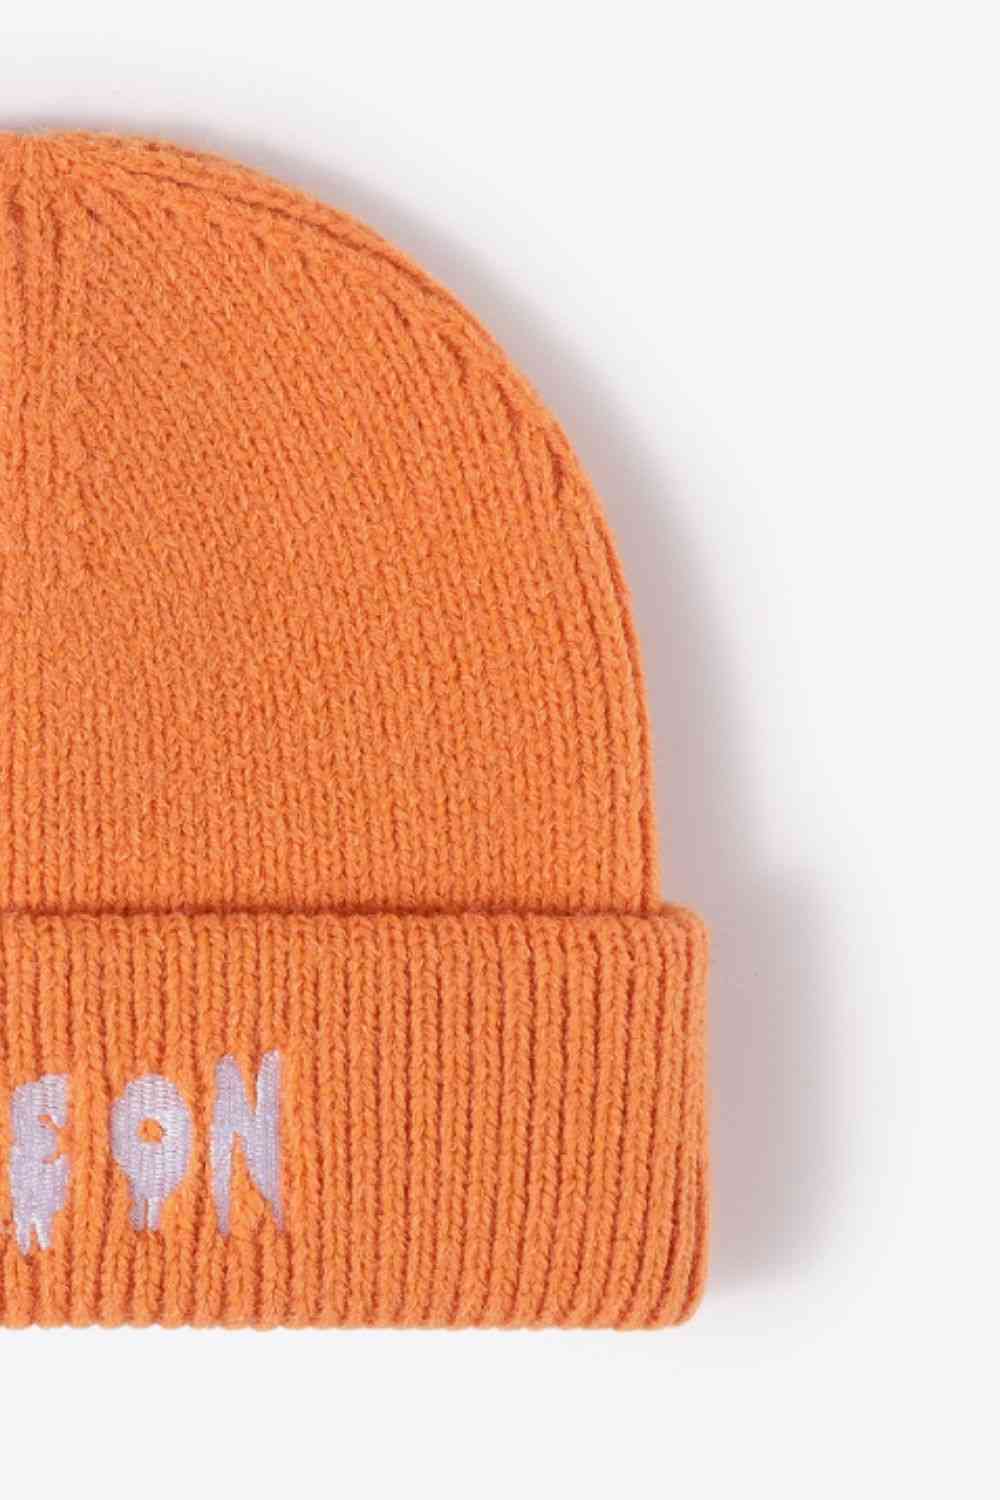 COME ON Embroidered Cuff Knit Beanie - Rose Gold Co. Shop